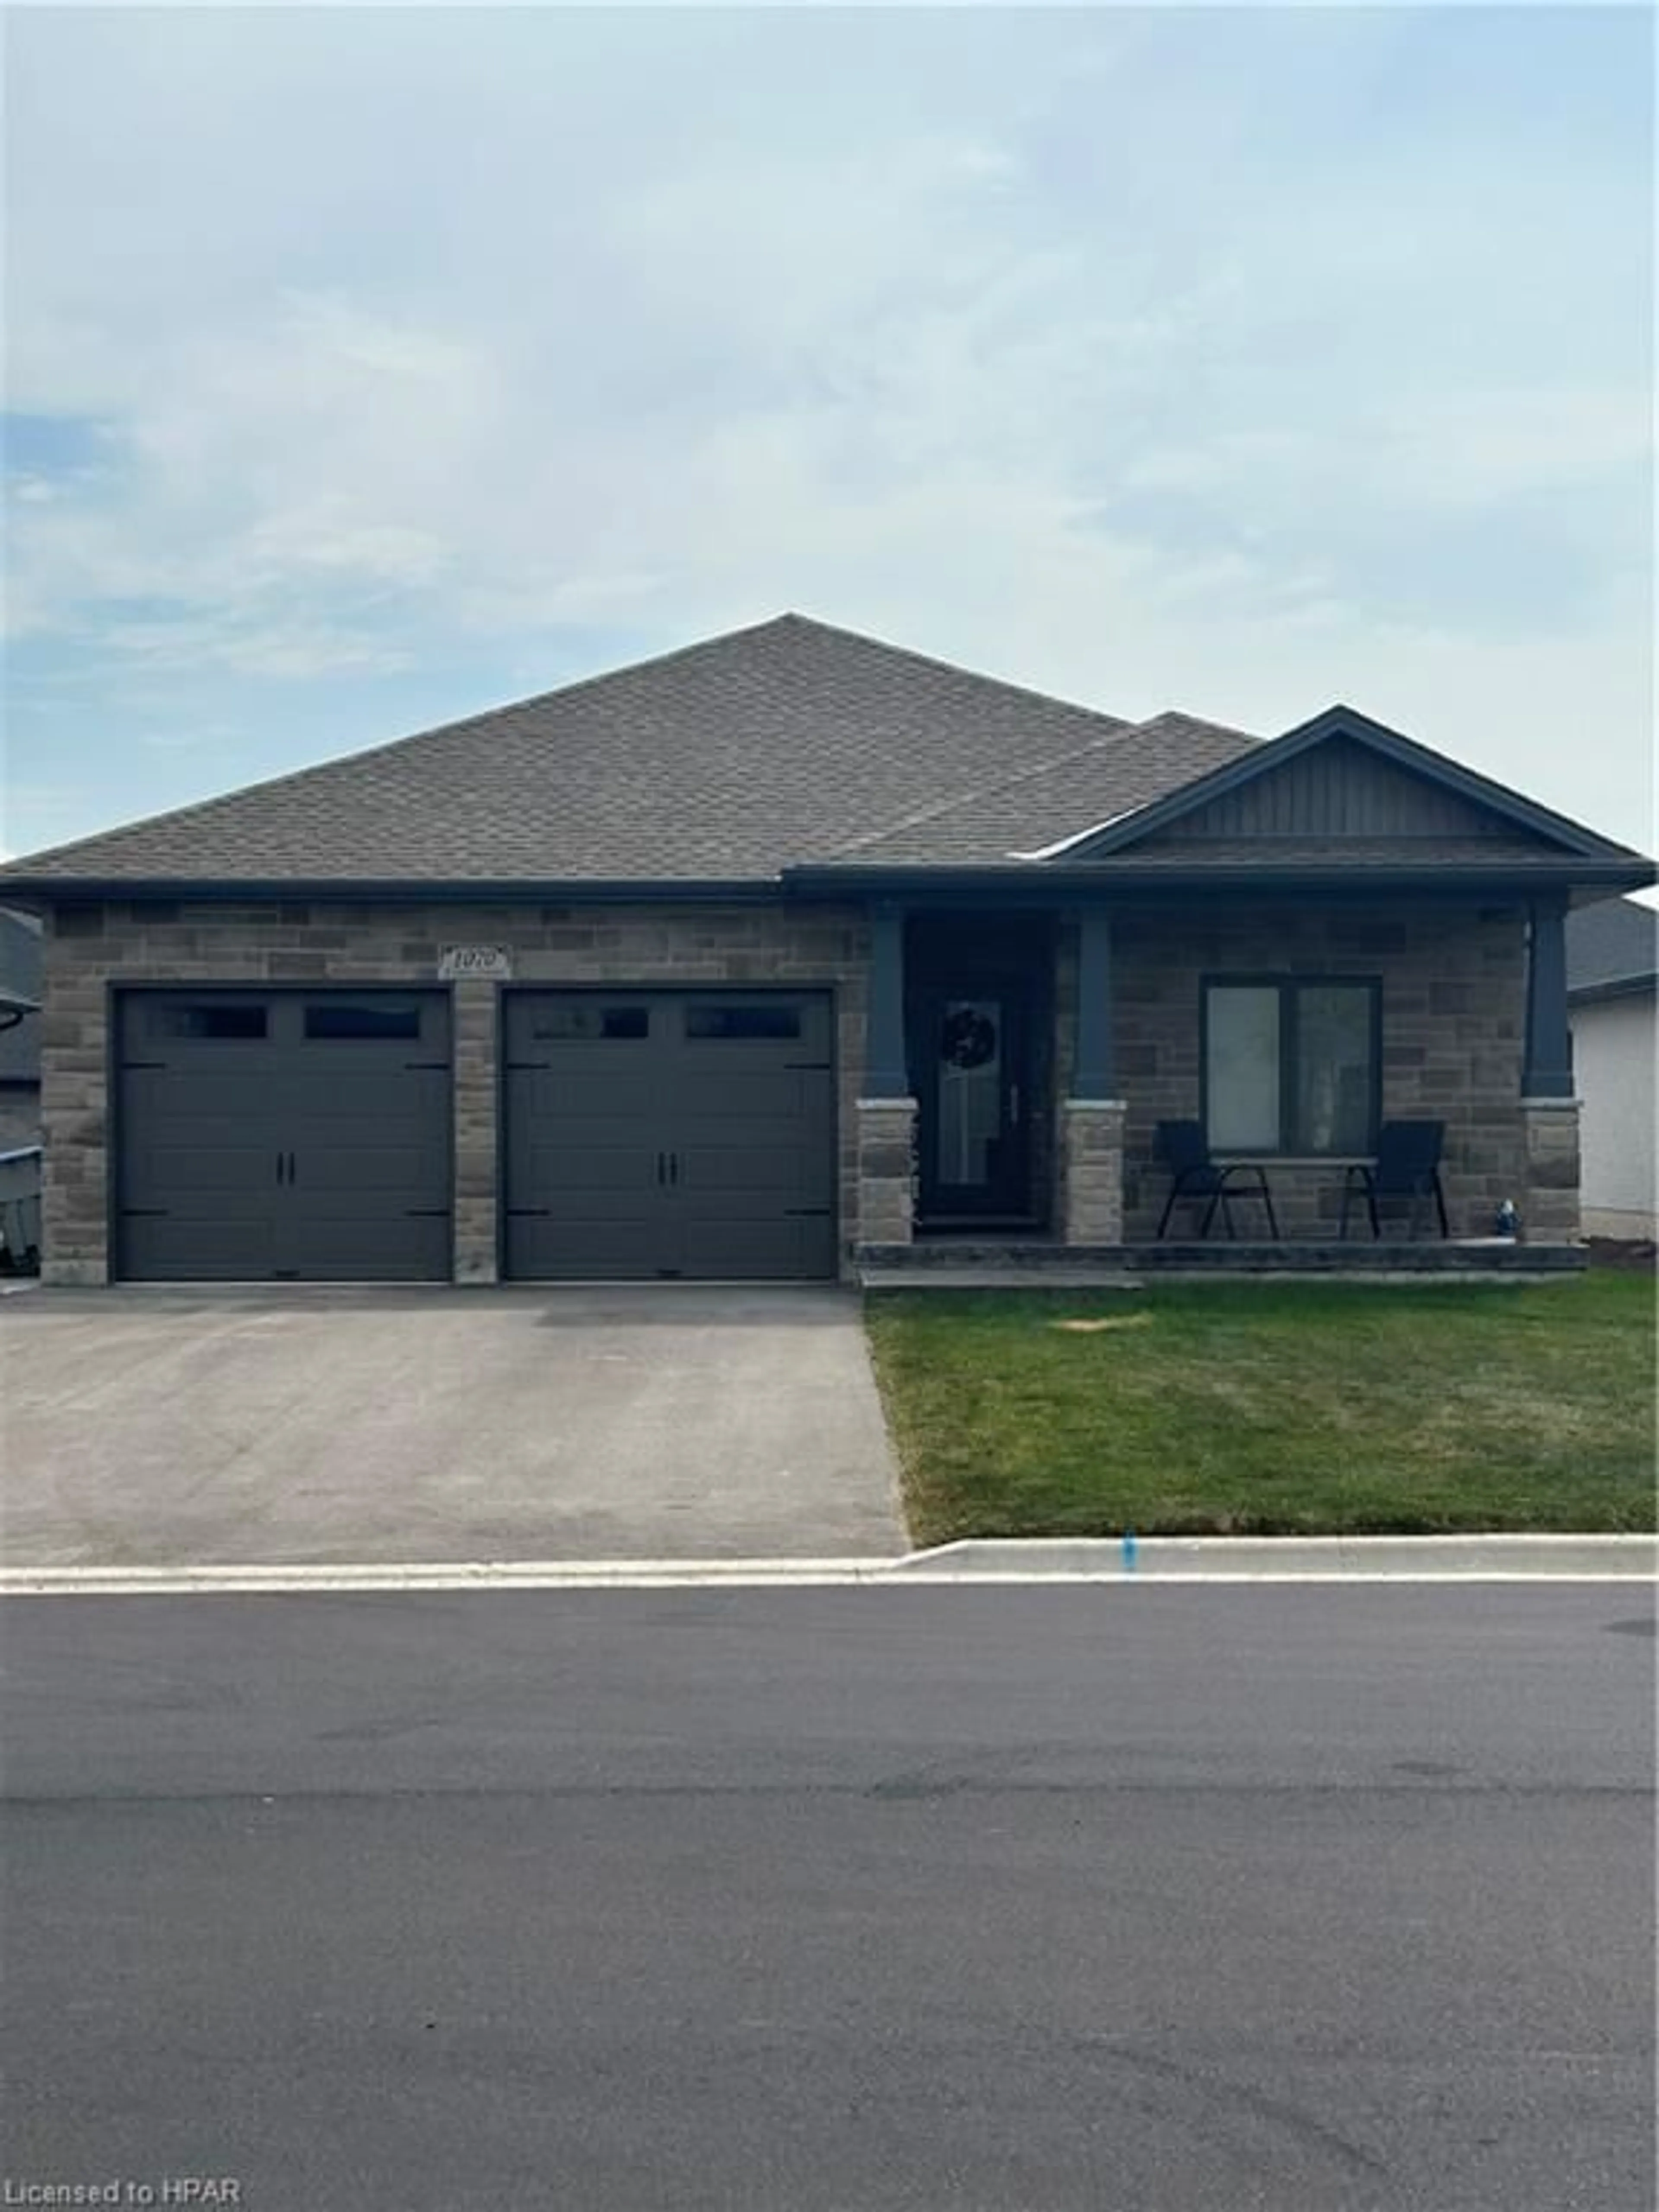 Frontside or backside of a home for 1070 Evans St, Listowel Ontario N4W 0C8